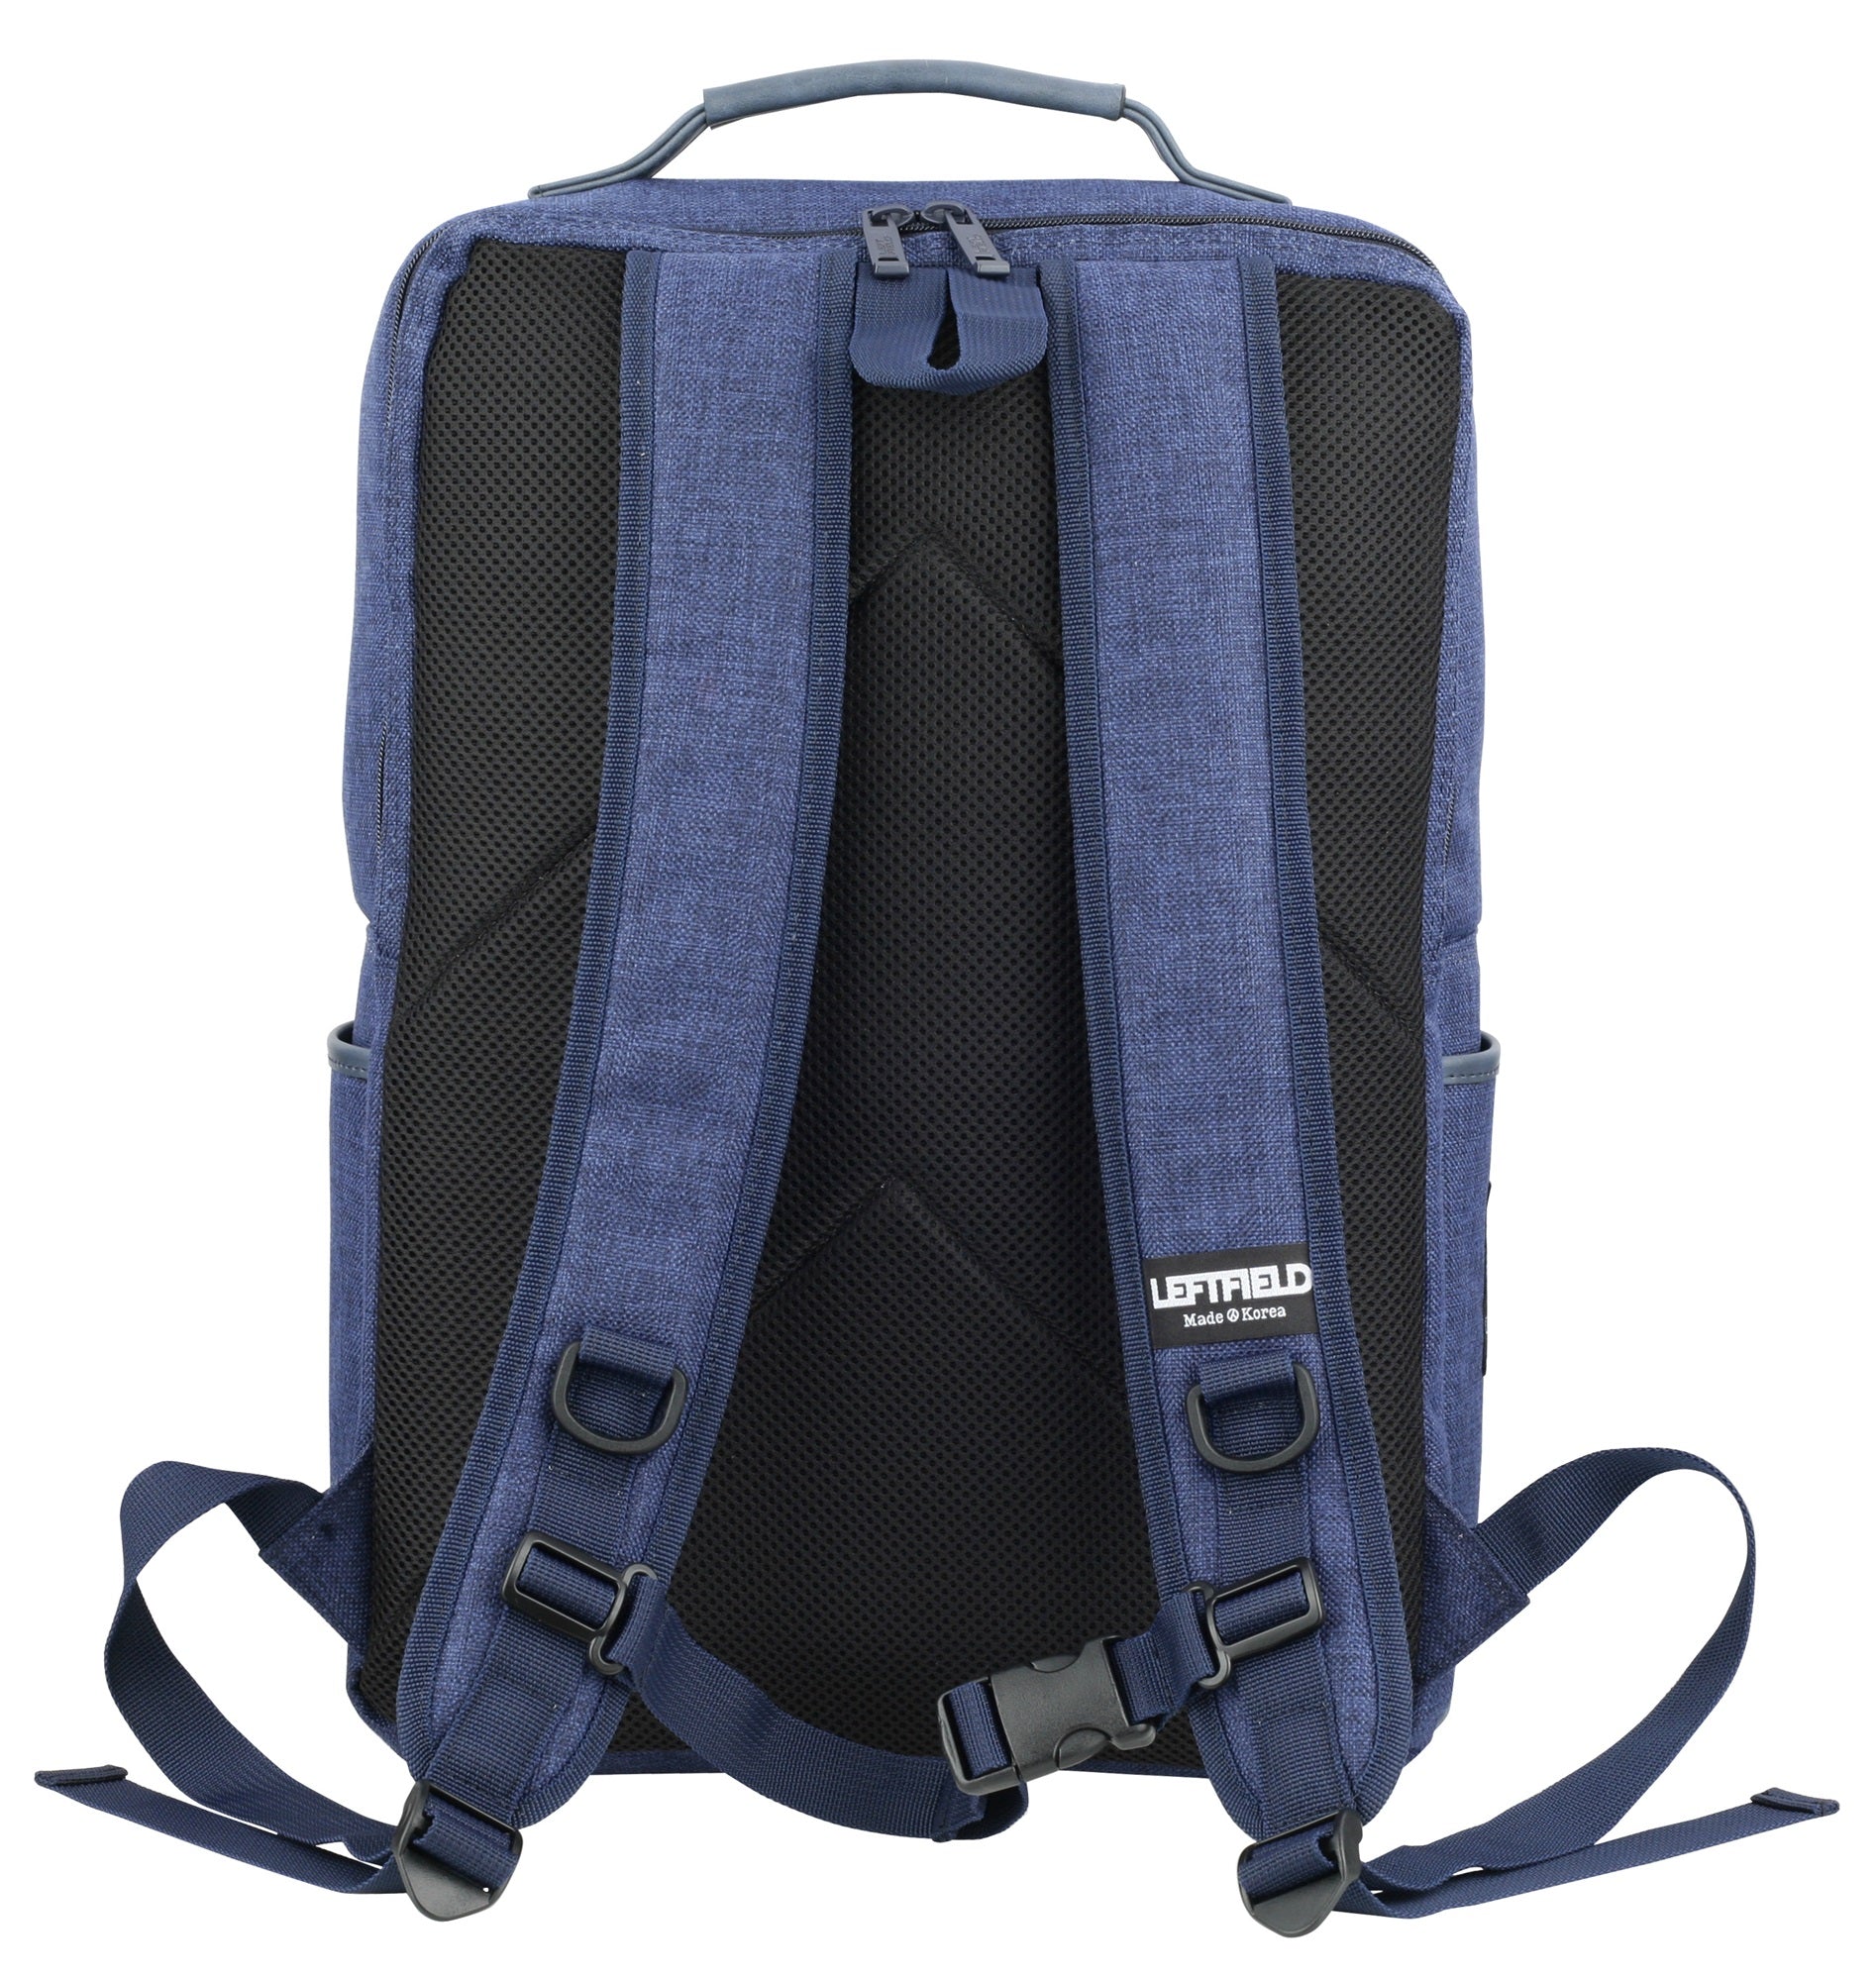 Blue Canvas Casual Laptop Daypack School Backpacks